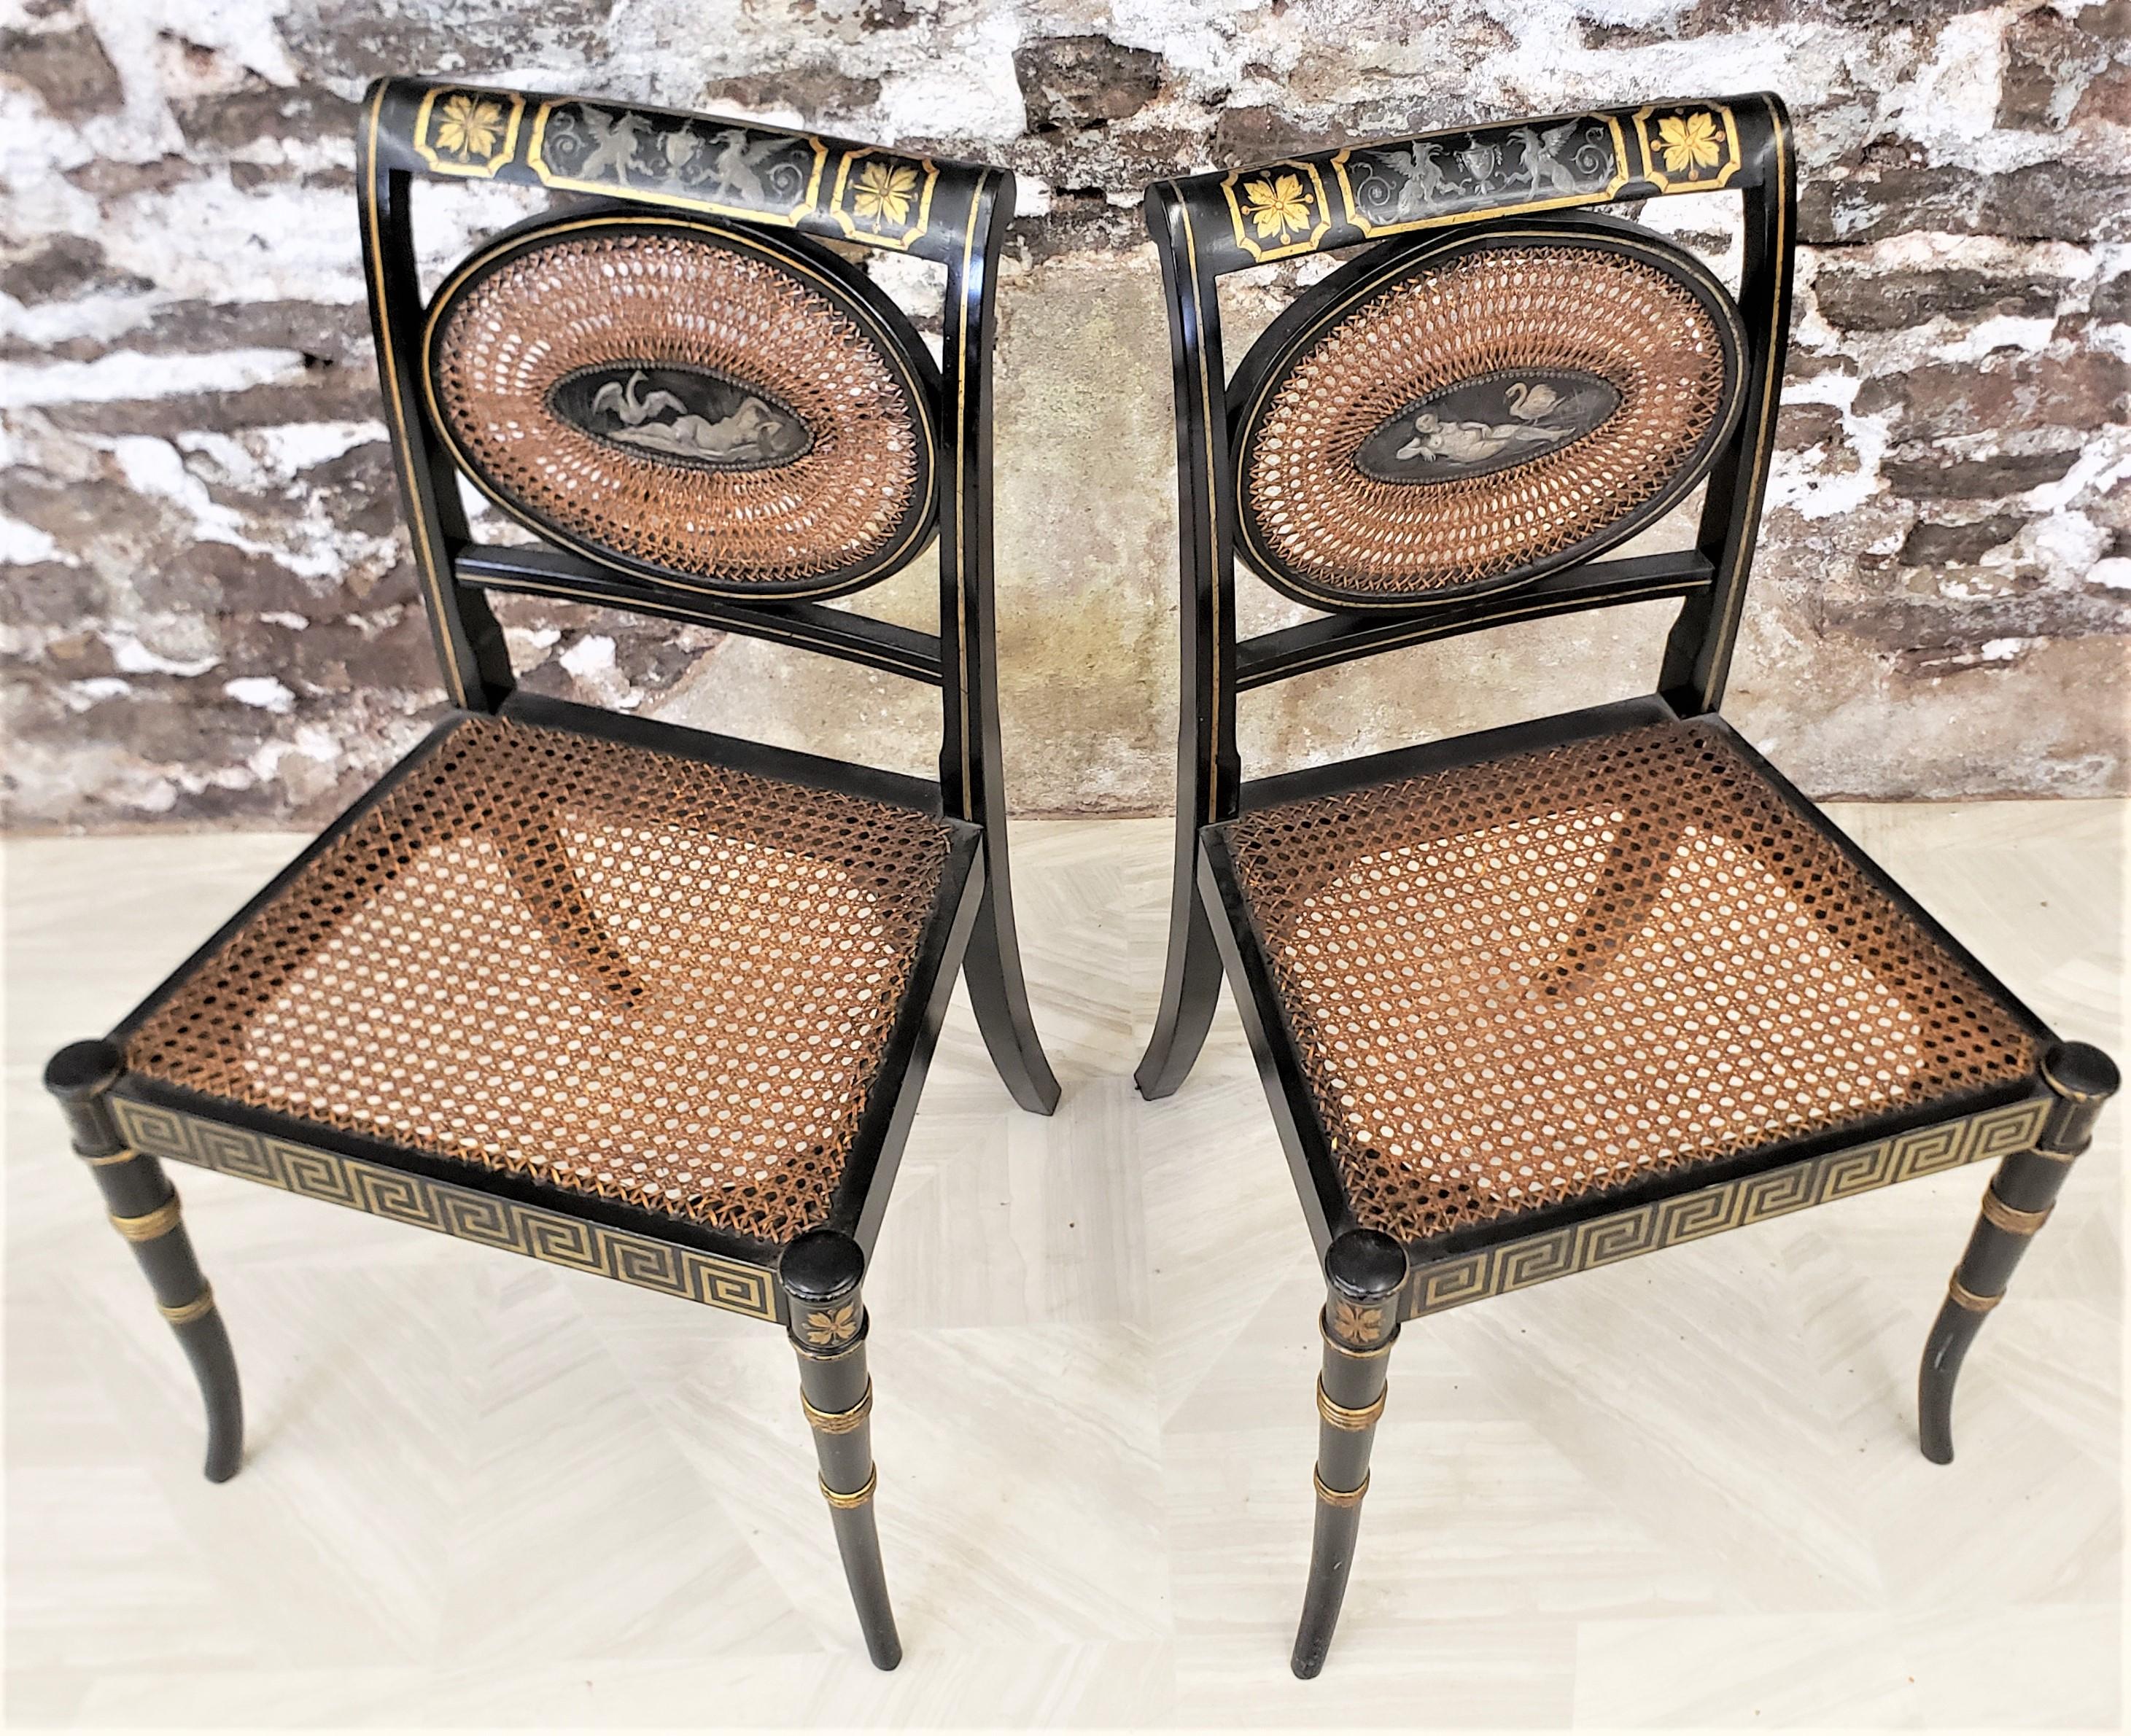 This pair of antique chairs are unsigned, but presumed to have originated from the United States and date to approximately 1920 and done in a Regency, or Hollywood Regency style. The chairs are done with pine frames with an ebonized finish with gilt